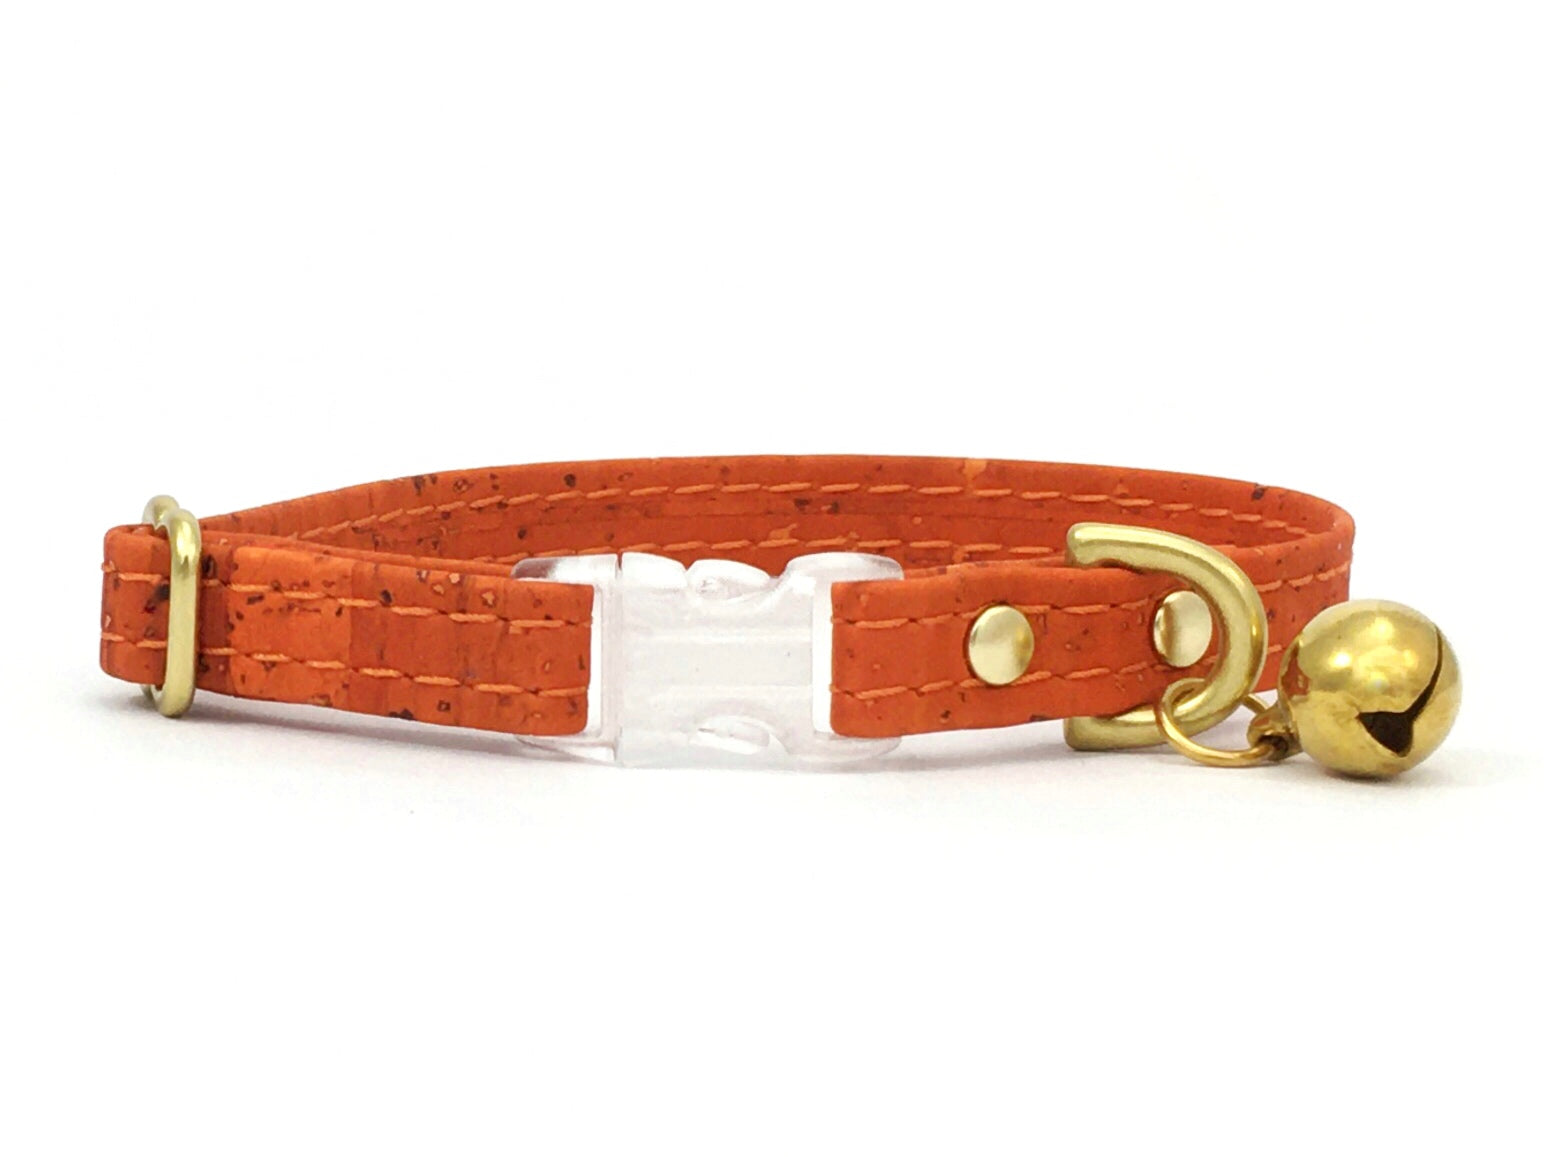 Orange cat collar in vegan leather with breakaway buckle and bell - brass and silver